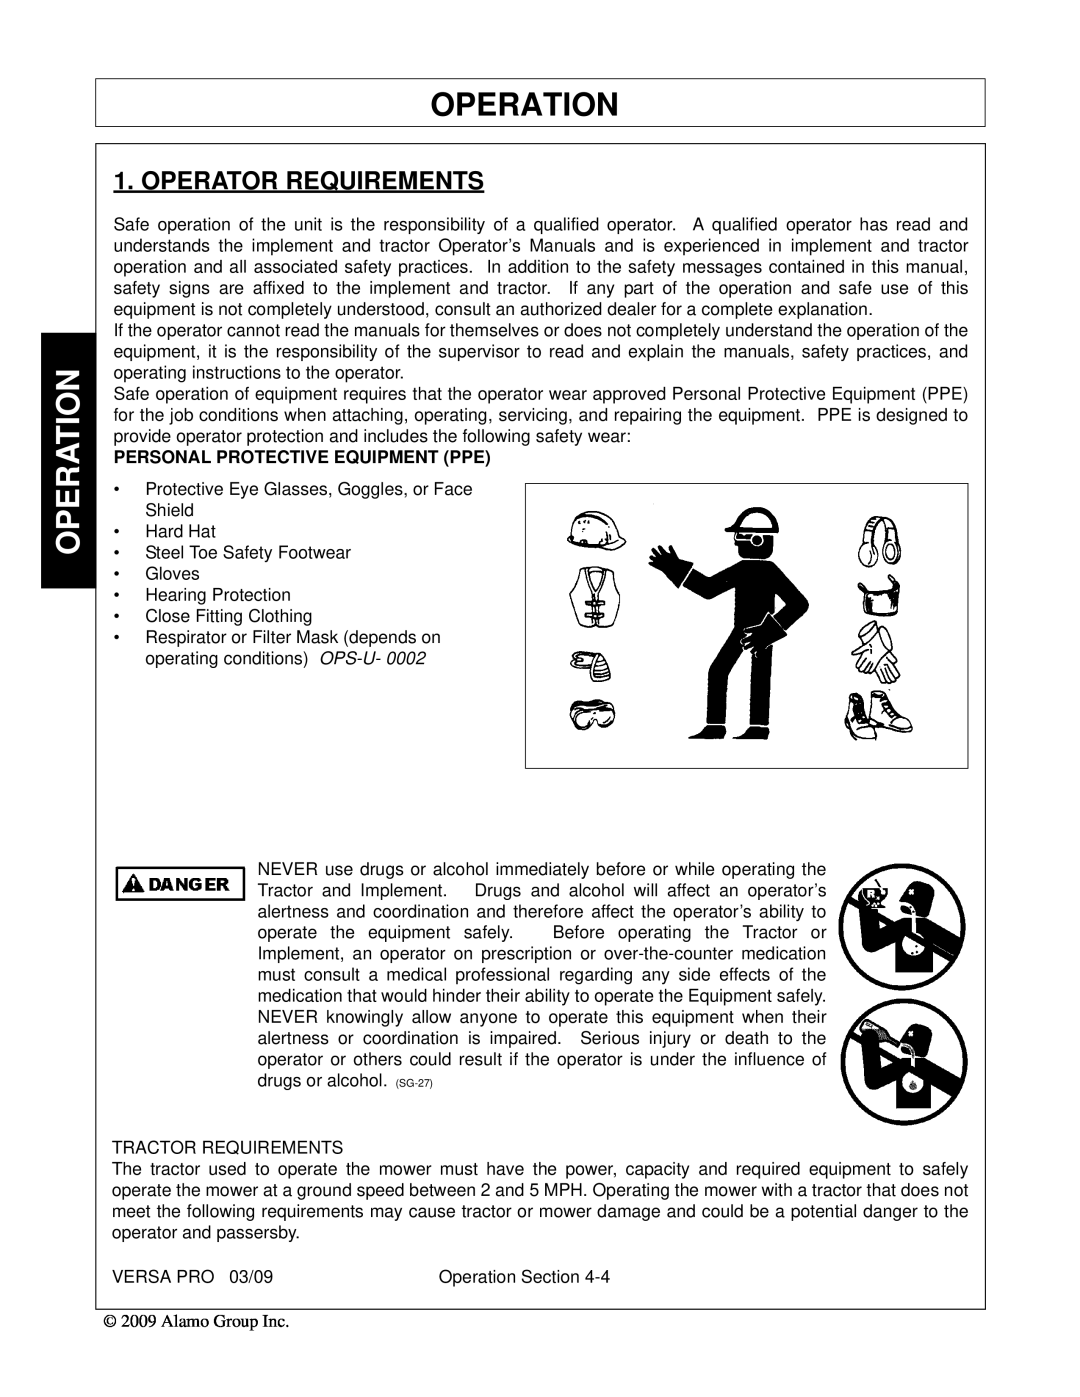 Alamo 803350C manual Operator Requirements, Operation, Personal Protective Equipment Ppe 